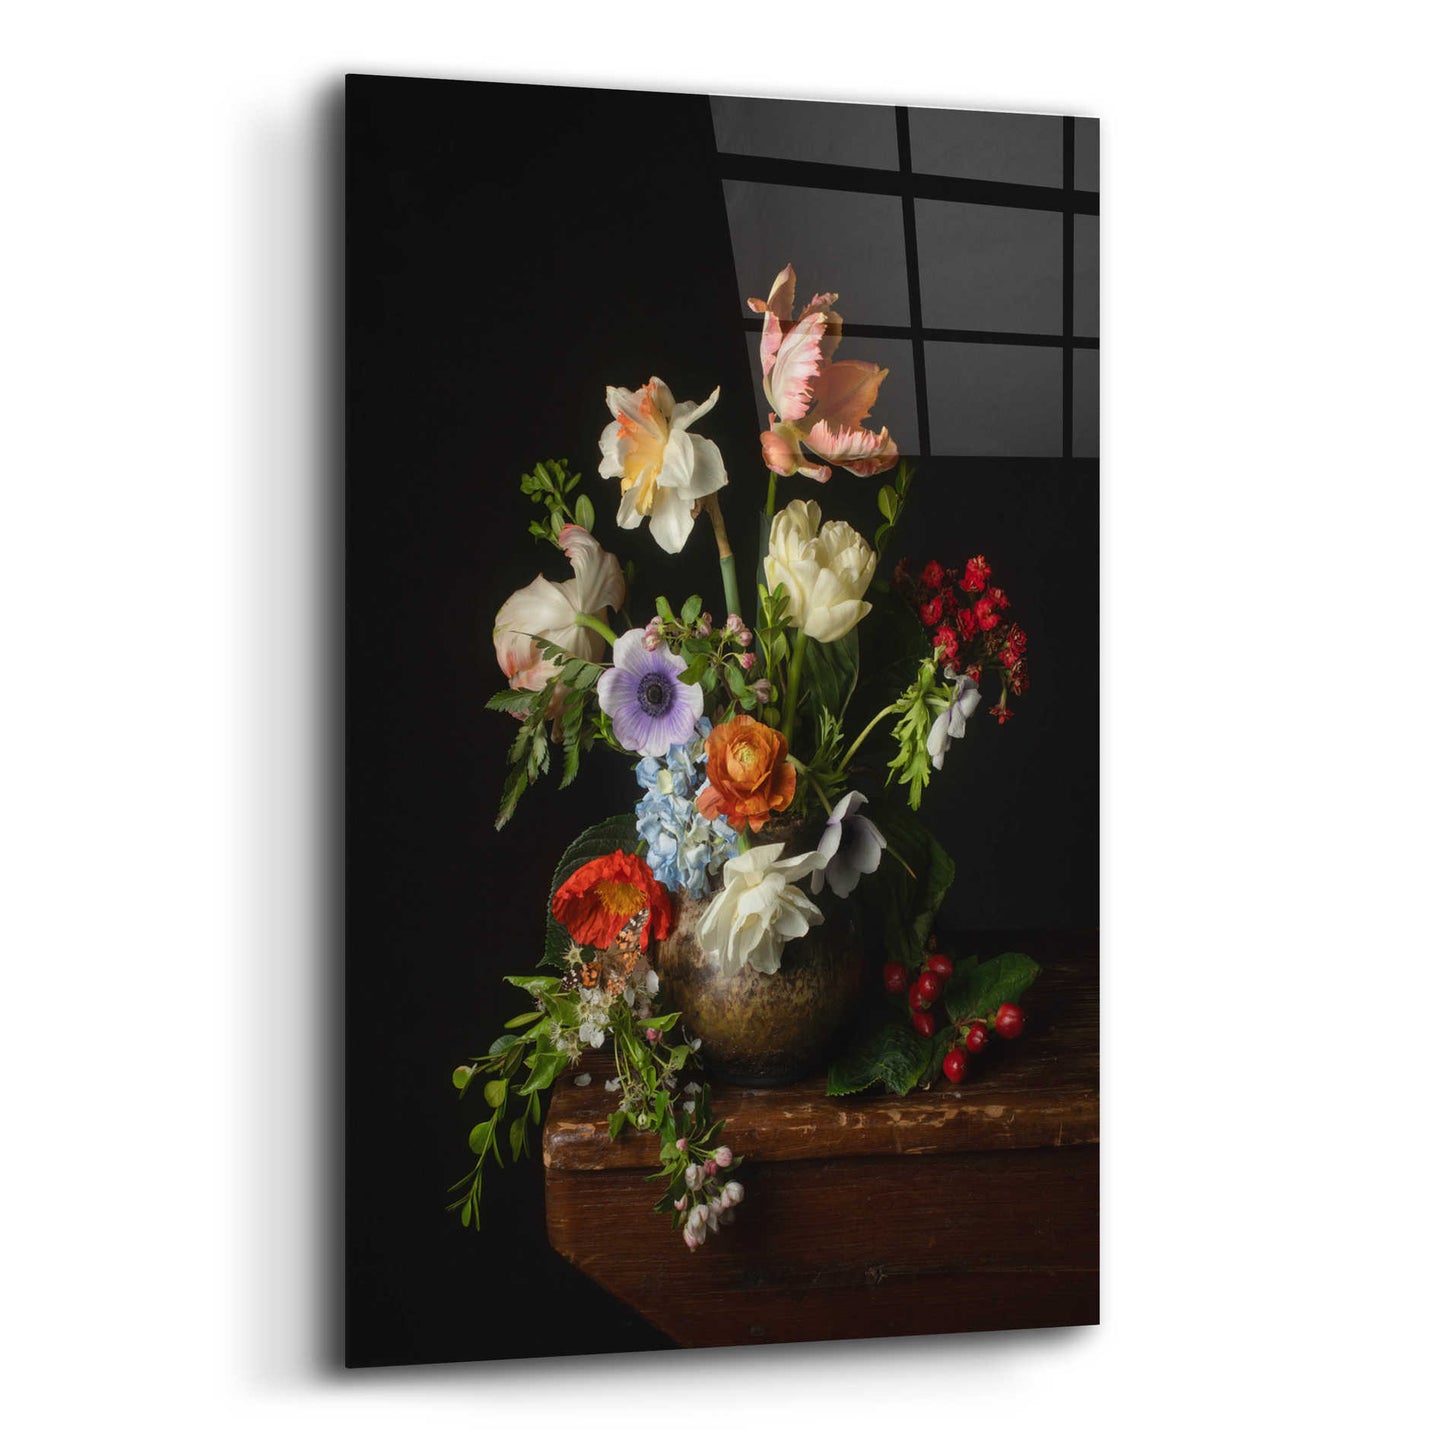 Epic Art 'A Bounty Of Spring Blooms' by Leah McLean Acrylic Glass Wall Art,12x16